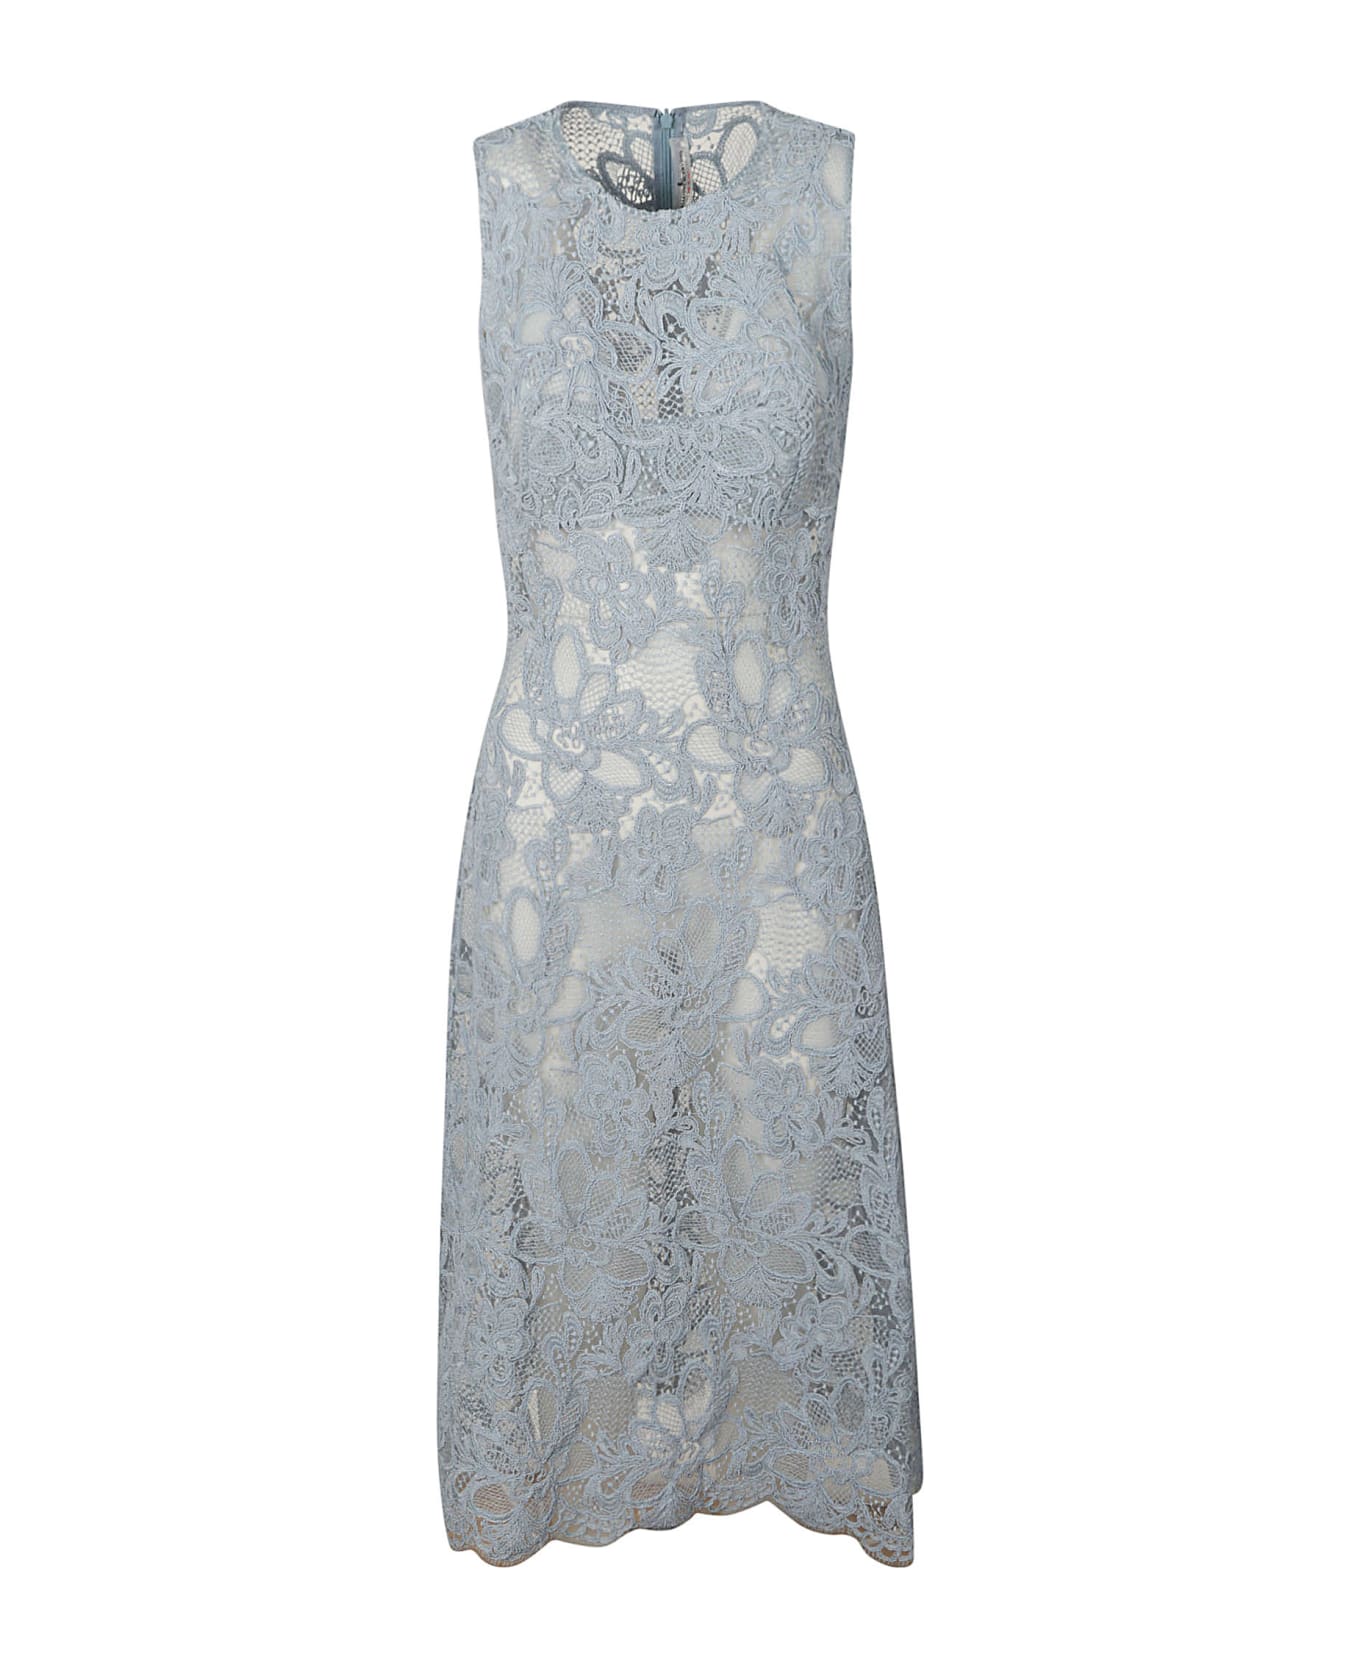 Ermanno Scervino Rear Zip Perforated Floral Sleeveless Dress - Azzure